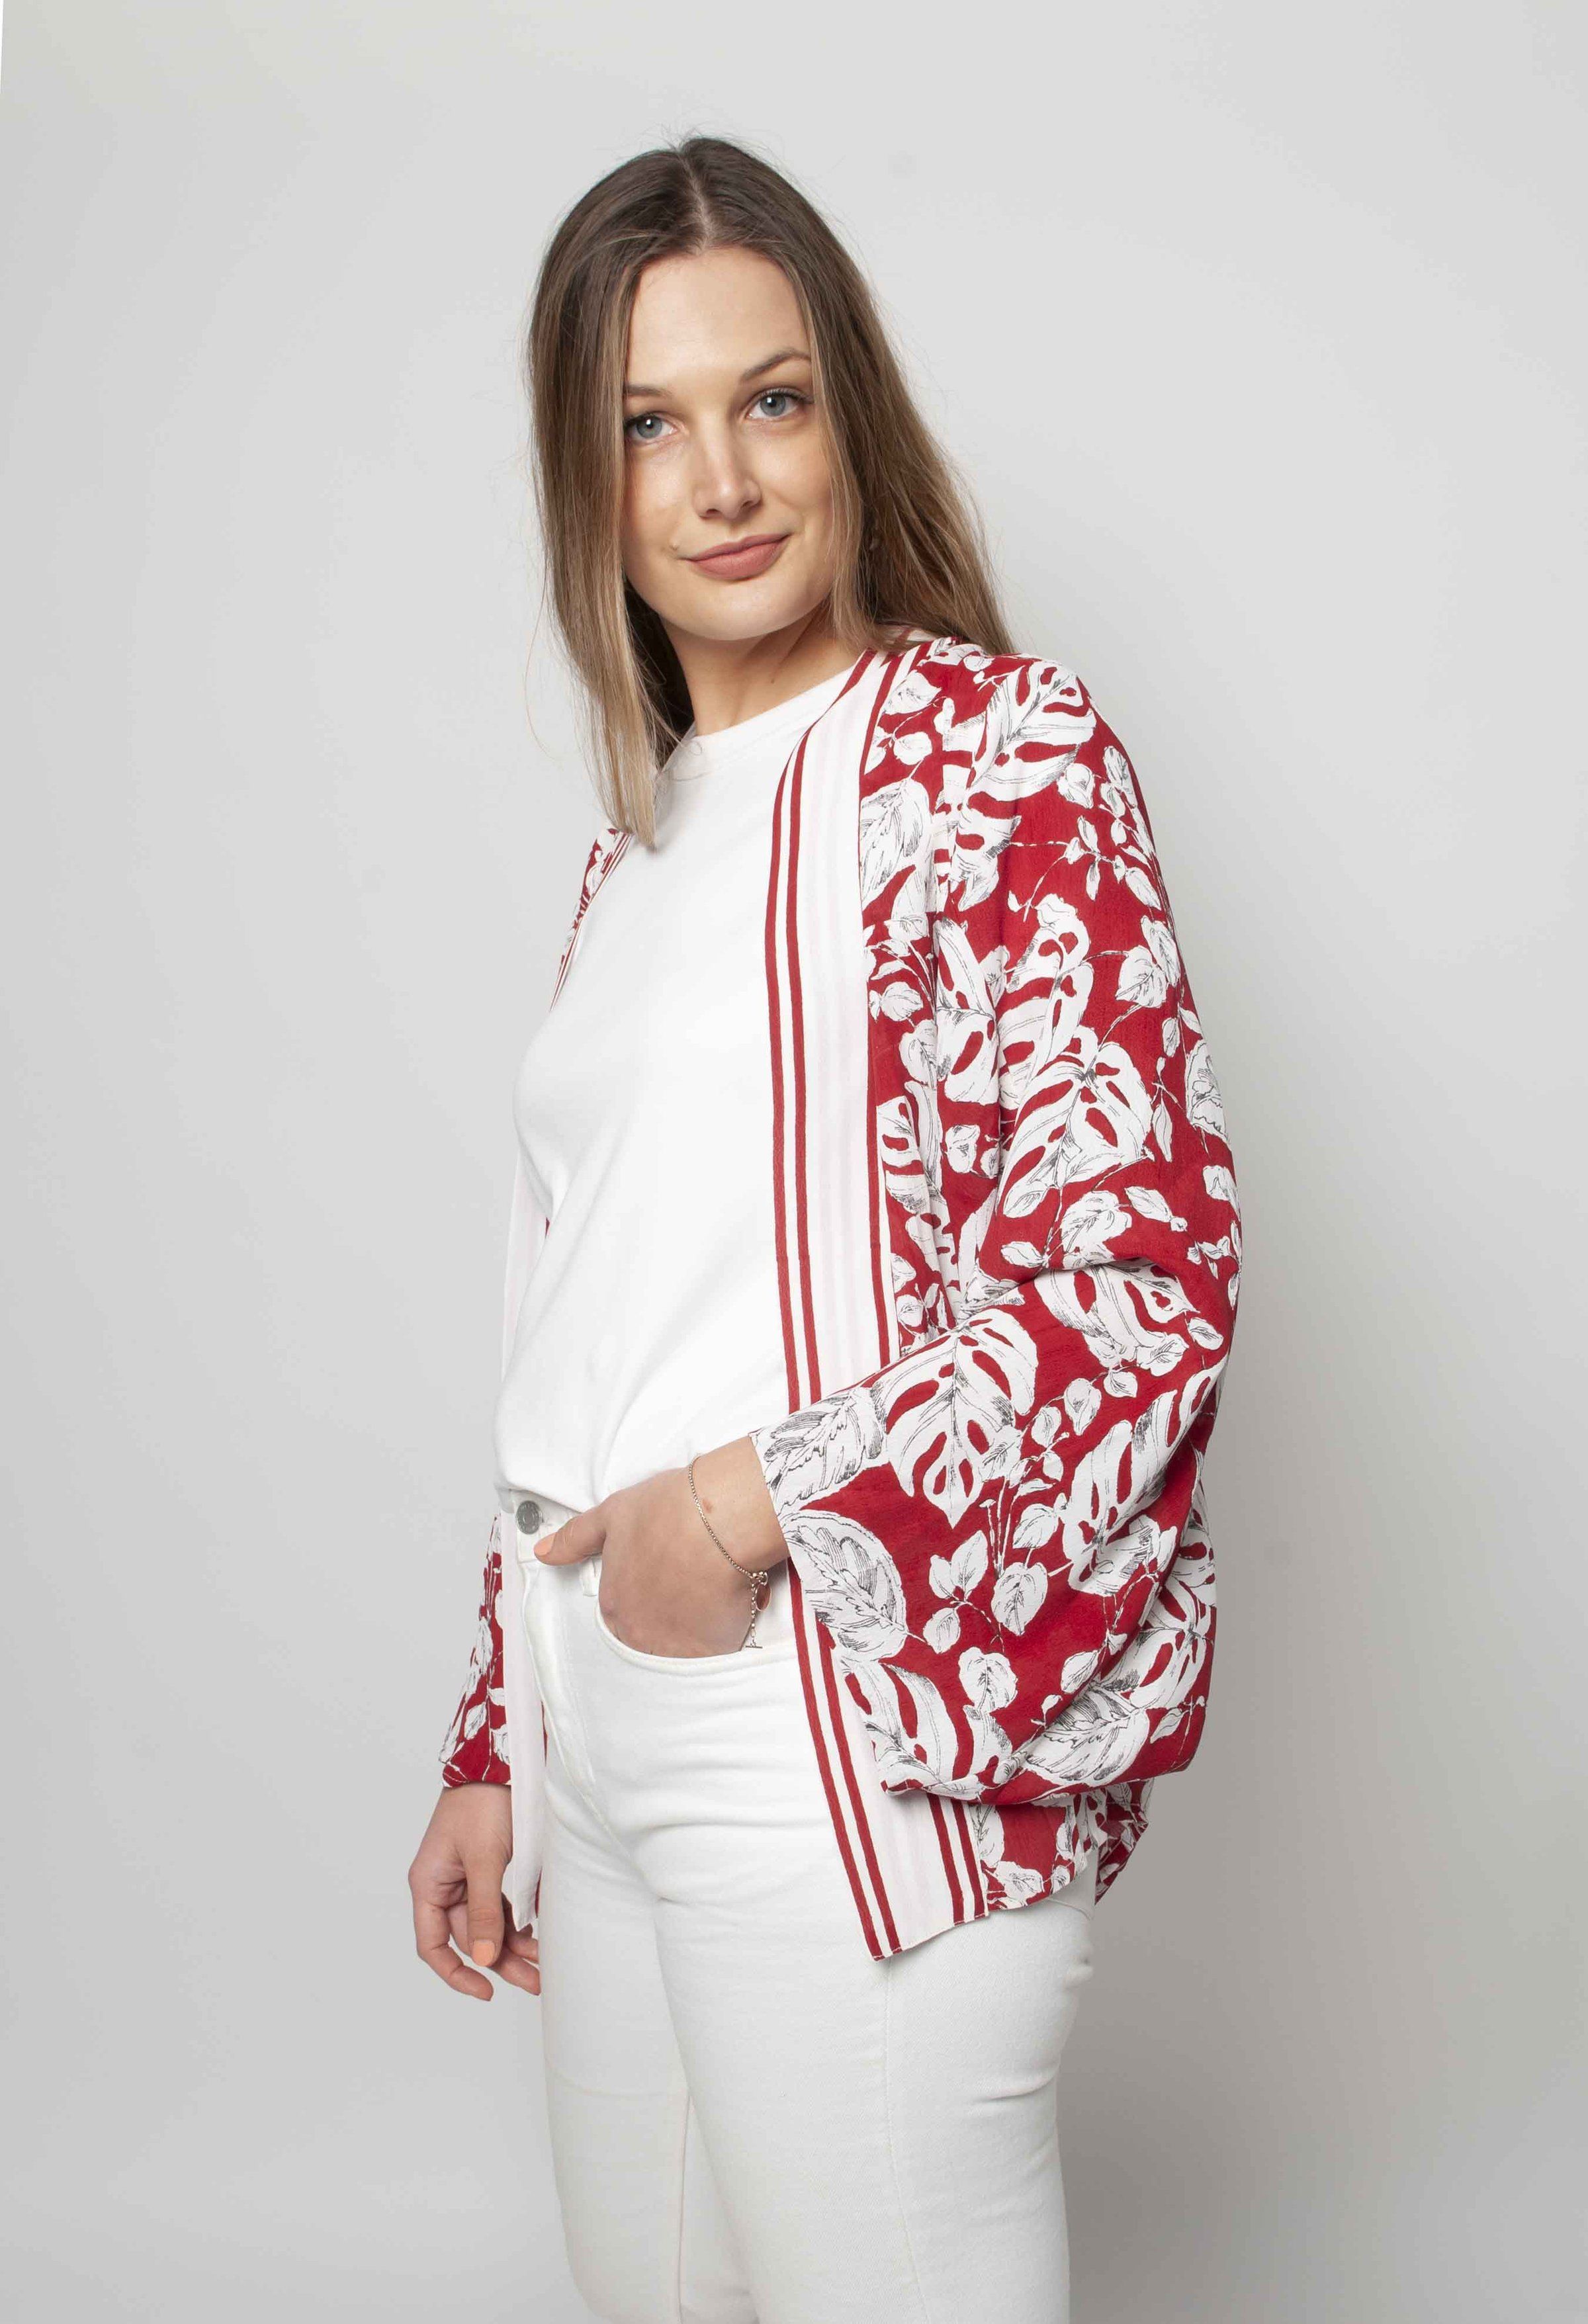 This gorgeous kimono has been inspired by travels to japan, it's striking monstera print is the perfect way to liven up your summer wardrobe. It has a lovely stripe detail on the collar and a full kimono sleeve